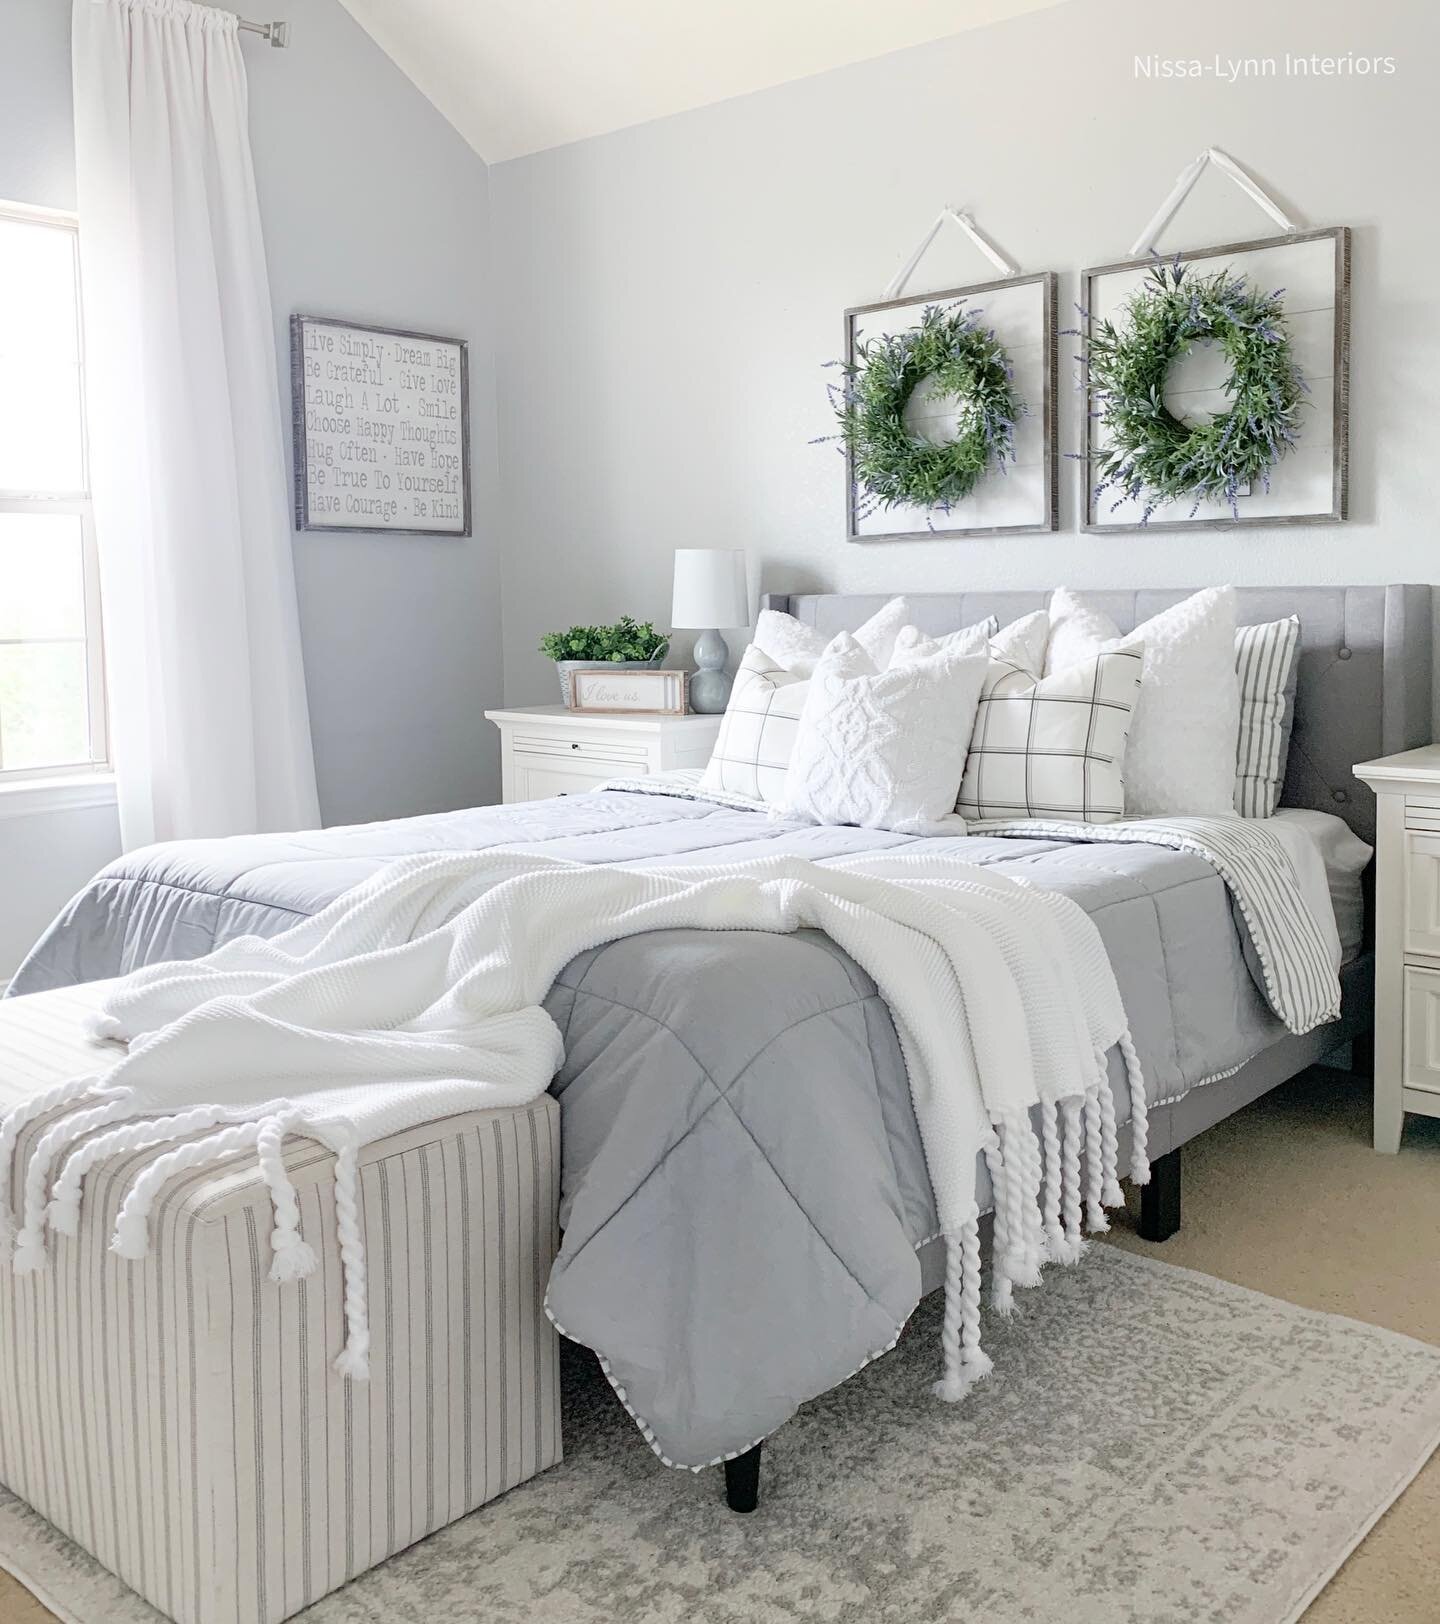 This room is getting a refresh! It used to be my daughters&rsquo;s room - decorated in gray and neutral tones. But now that she&rsquo;s married and has a place of her own, it&rsquo;s a guest bedroom. I&rsquo;m going to give it a new look with new fur